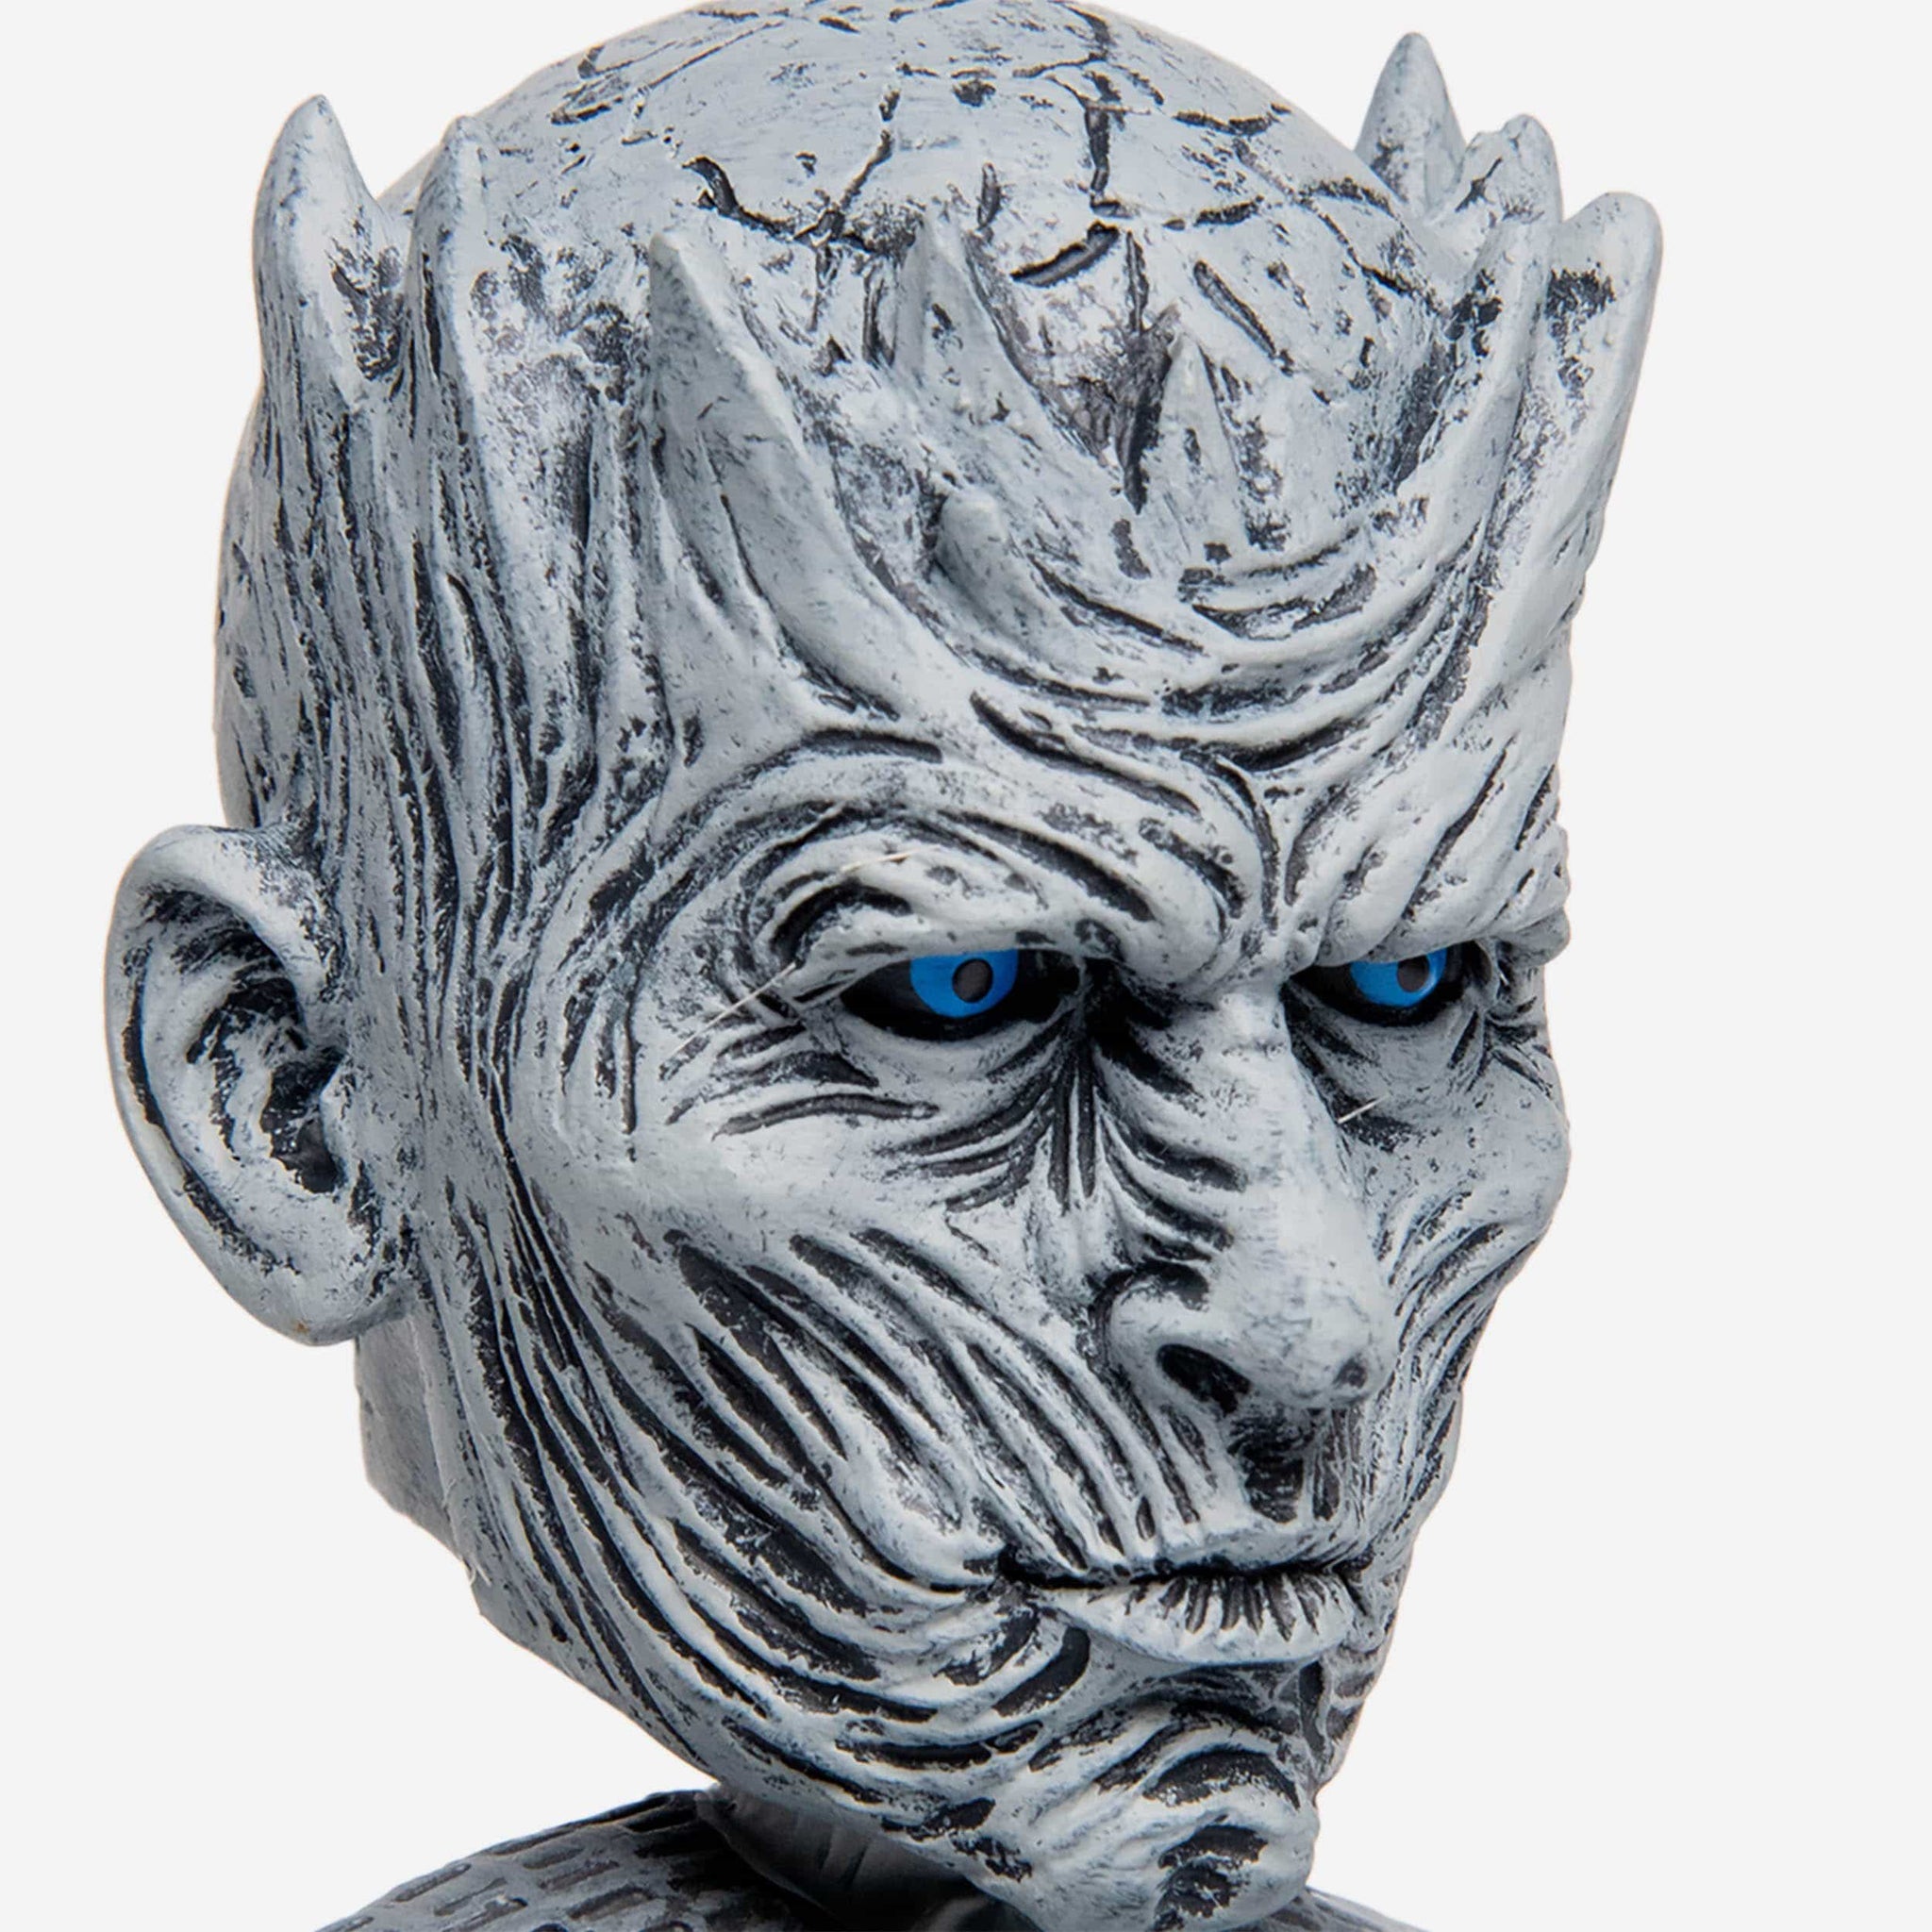 Tigers' Game of Thrones night will feature bobblehead of J.D.